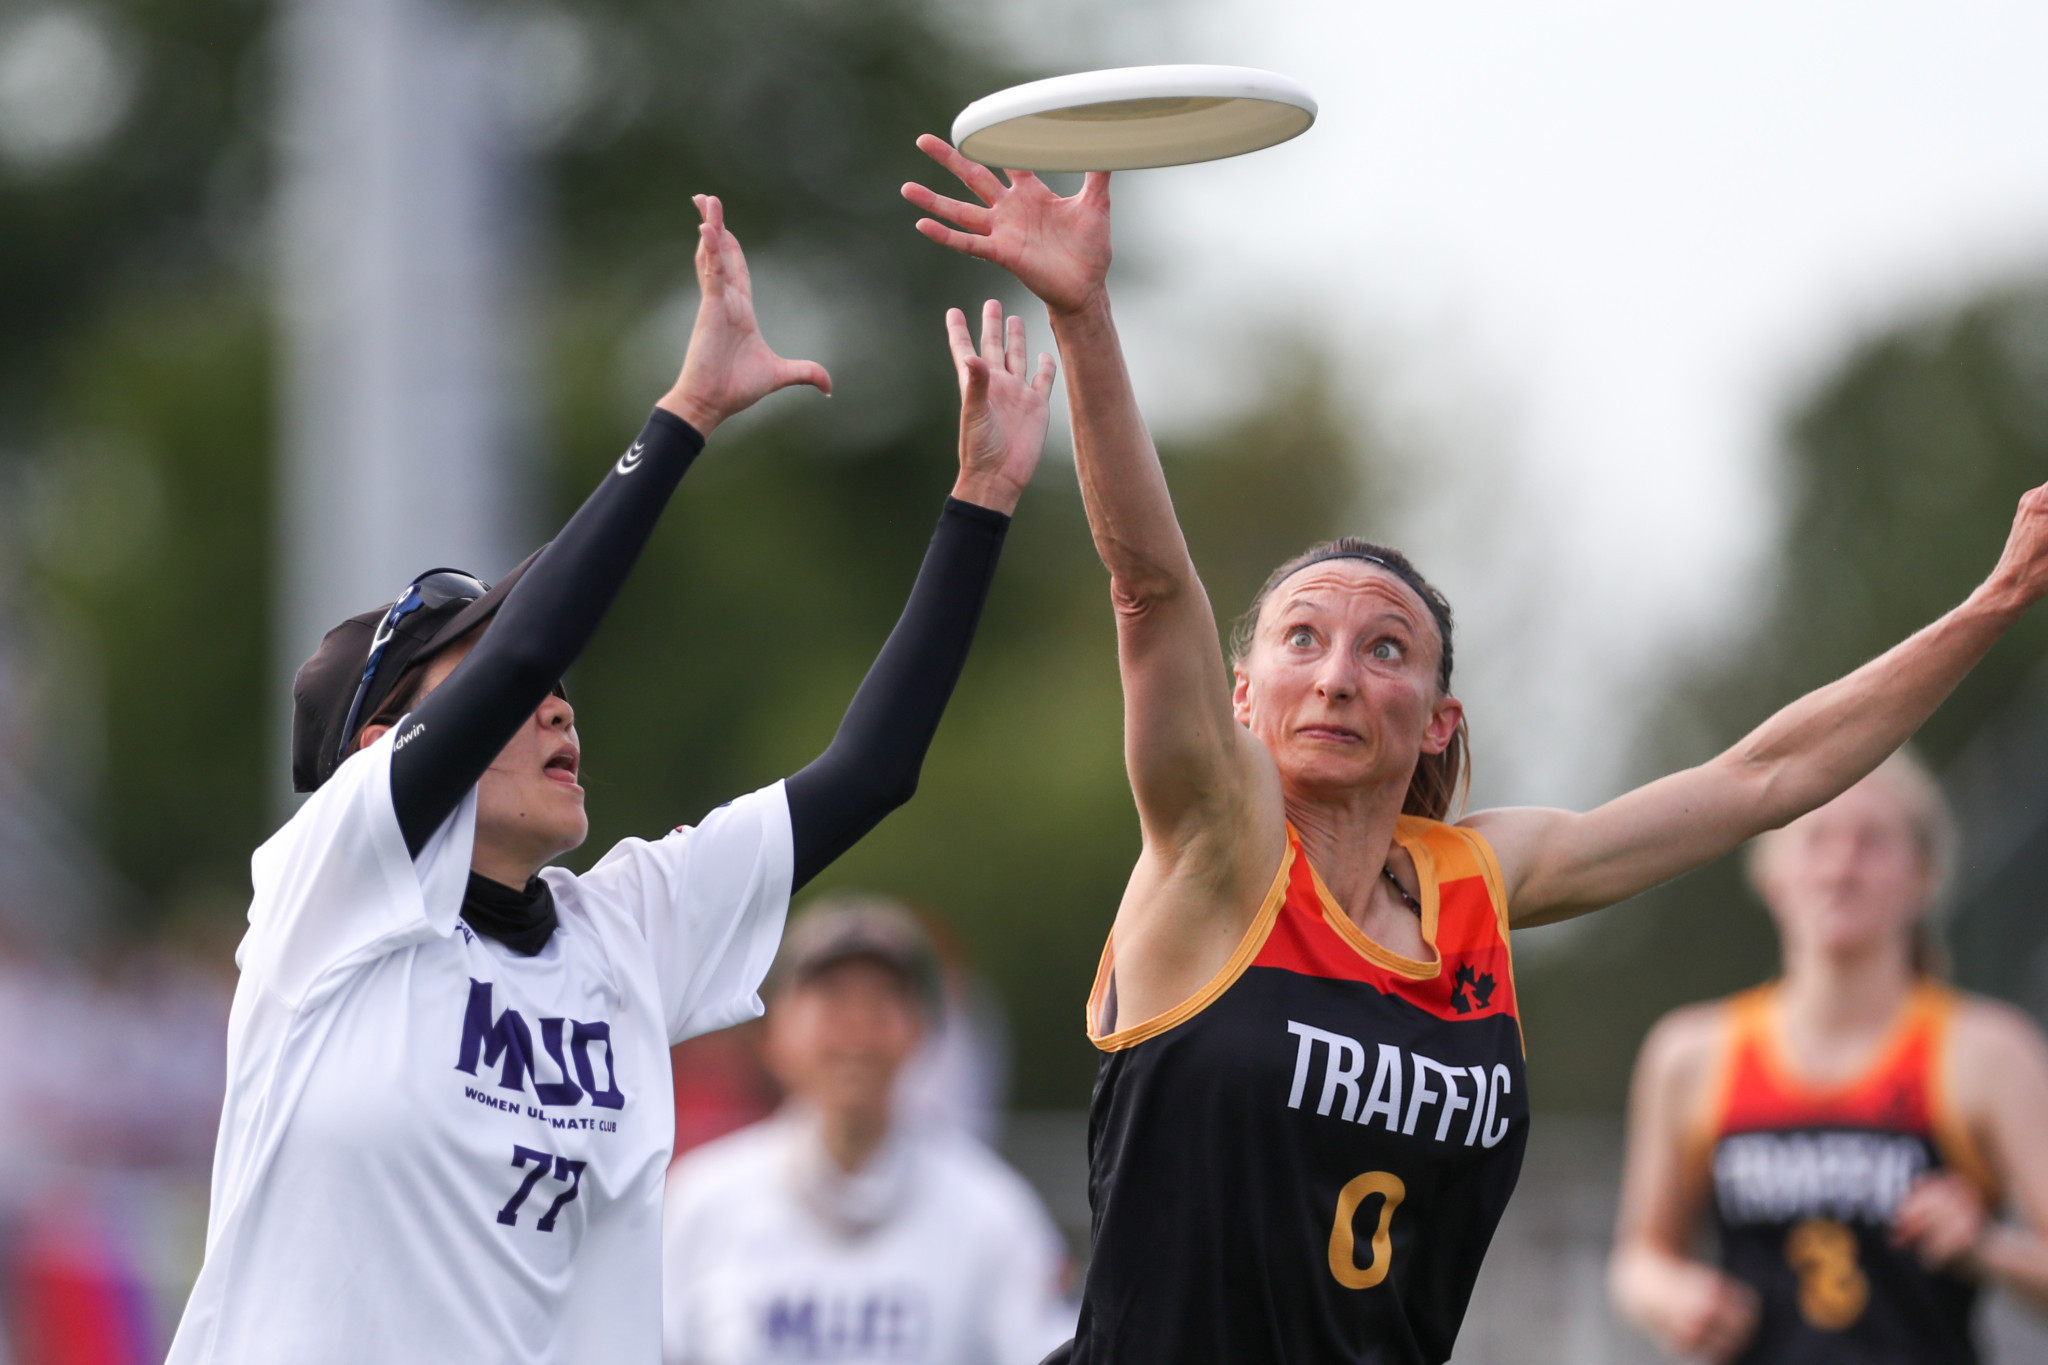 MUD and Traffic showcased an entertaining start to the World Ultimate Club Championships ©Paul Rutherford for Ultiphotos